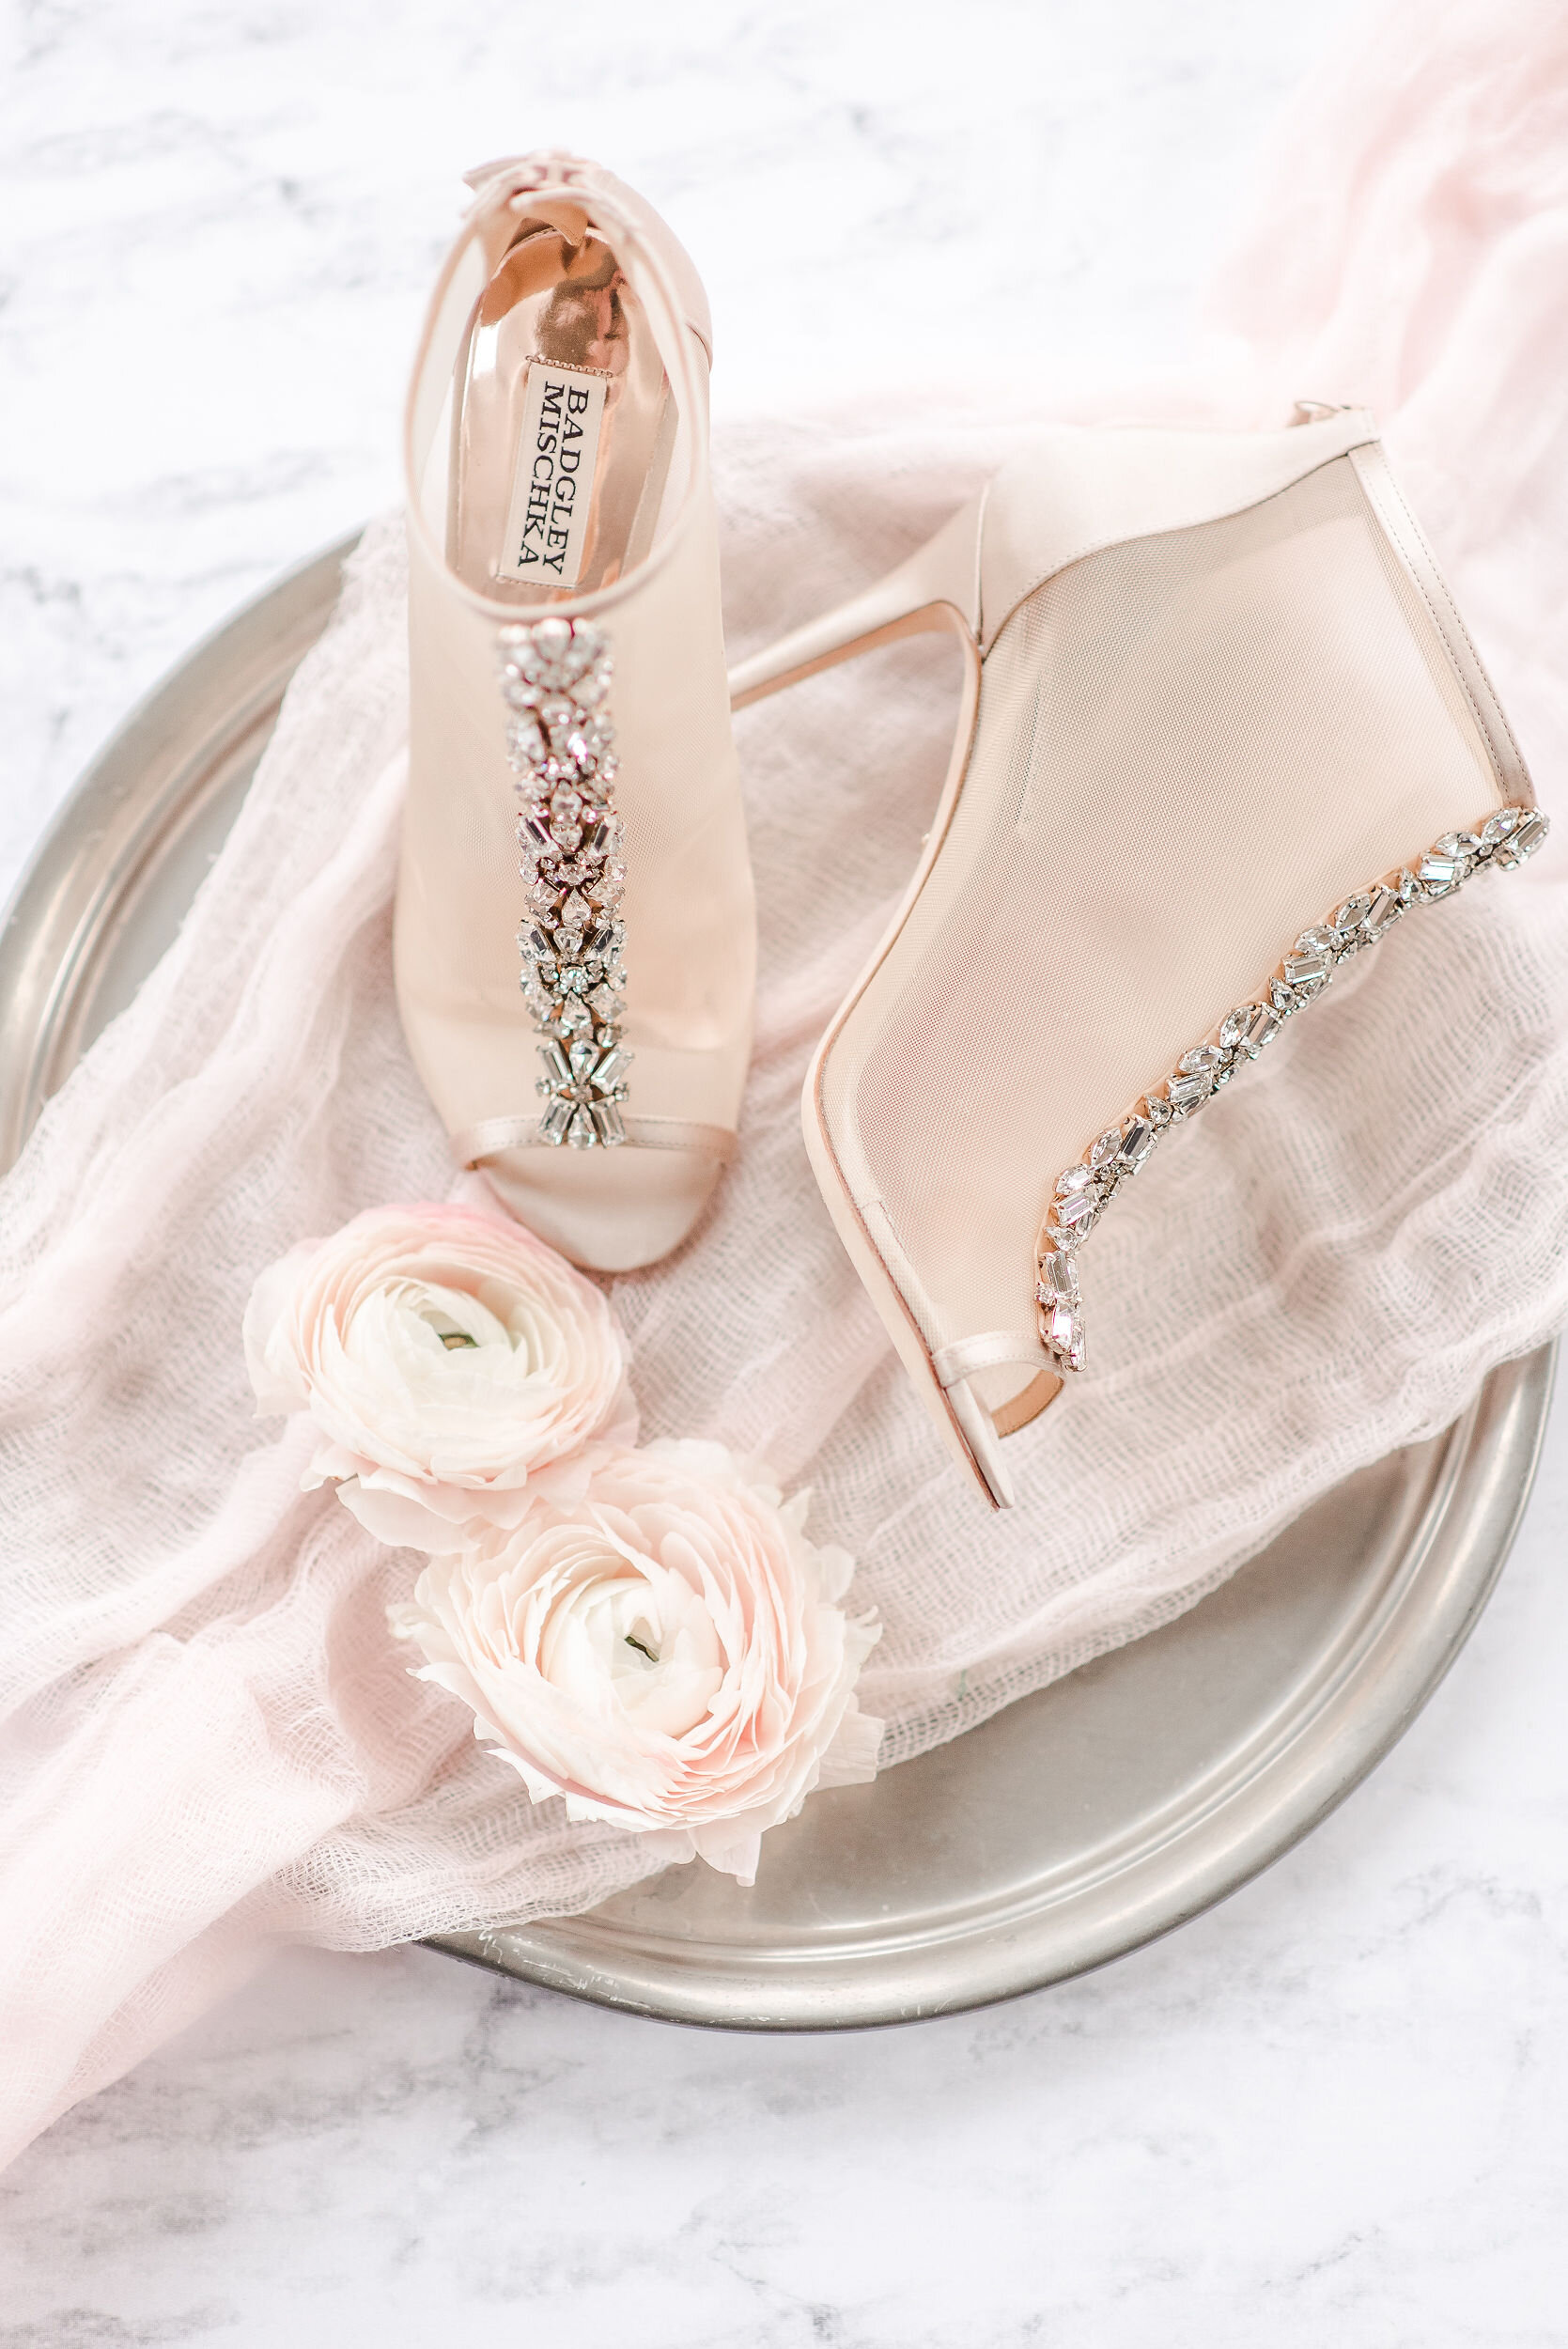 Blush and Ivory Elopement Inspo at the Pennsylvania State Capitol